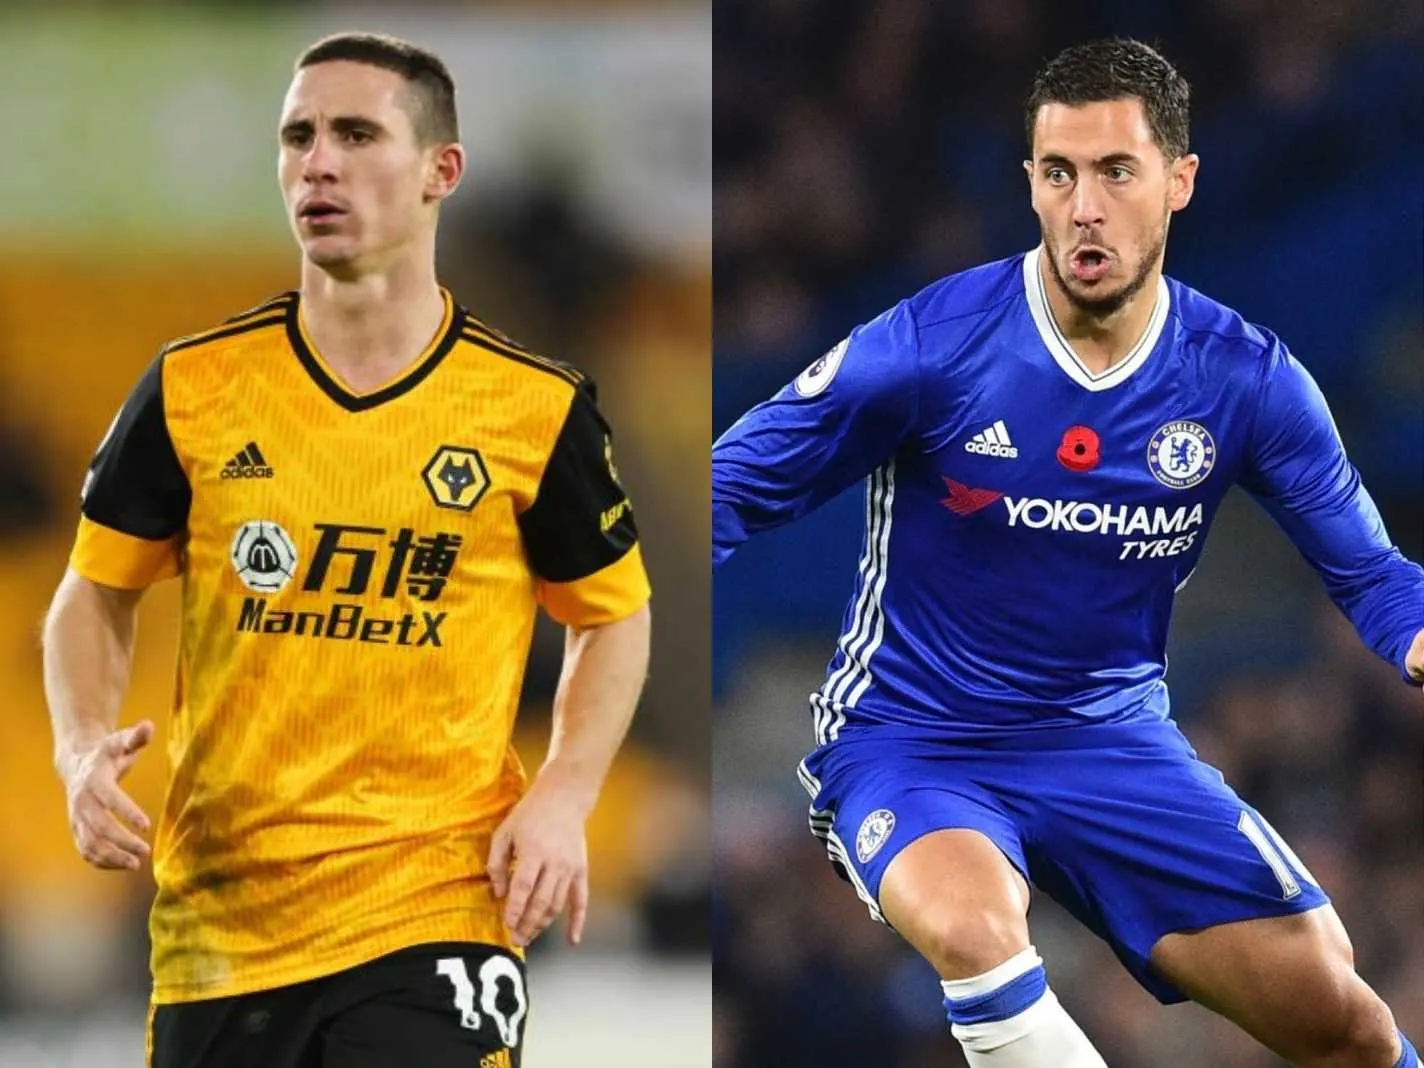 Fans can't believe the similarity between Podence and Hazard